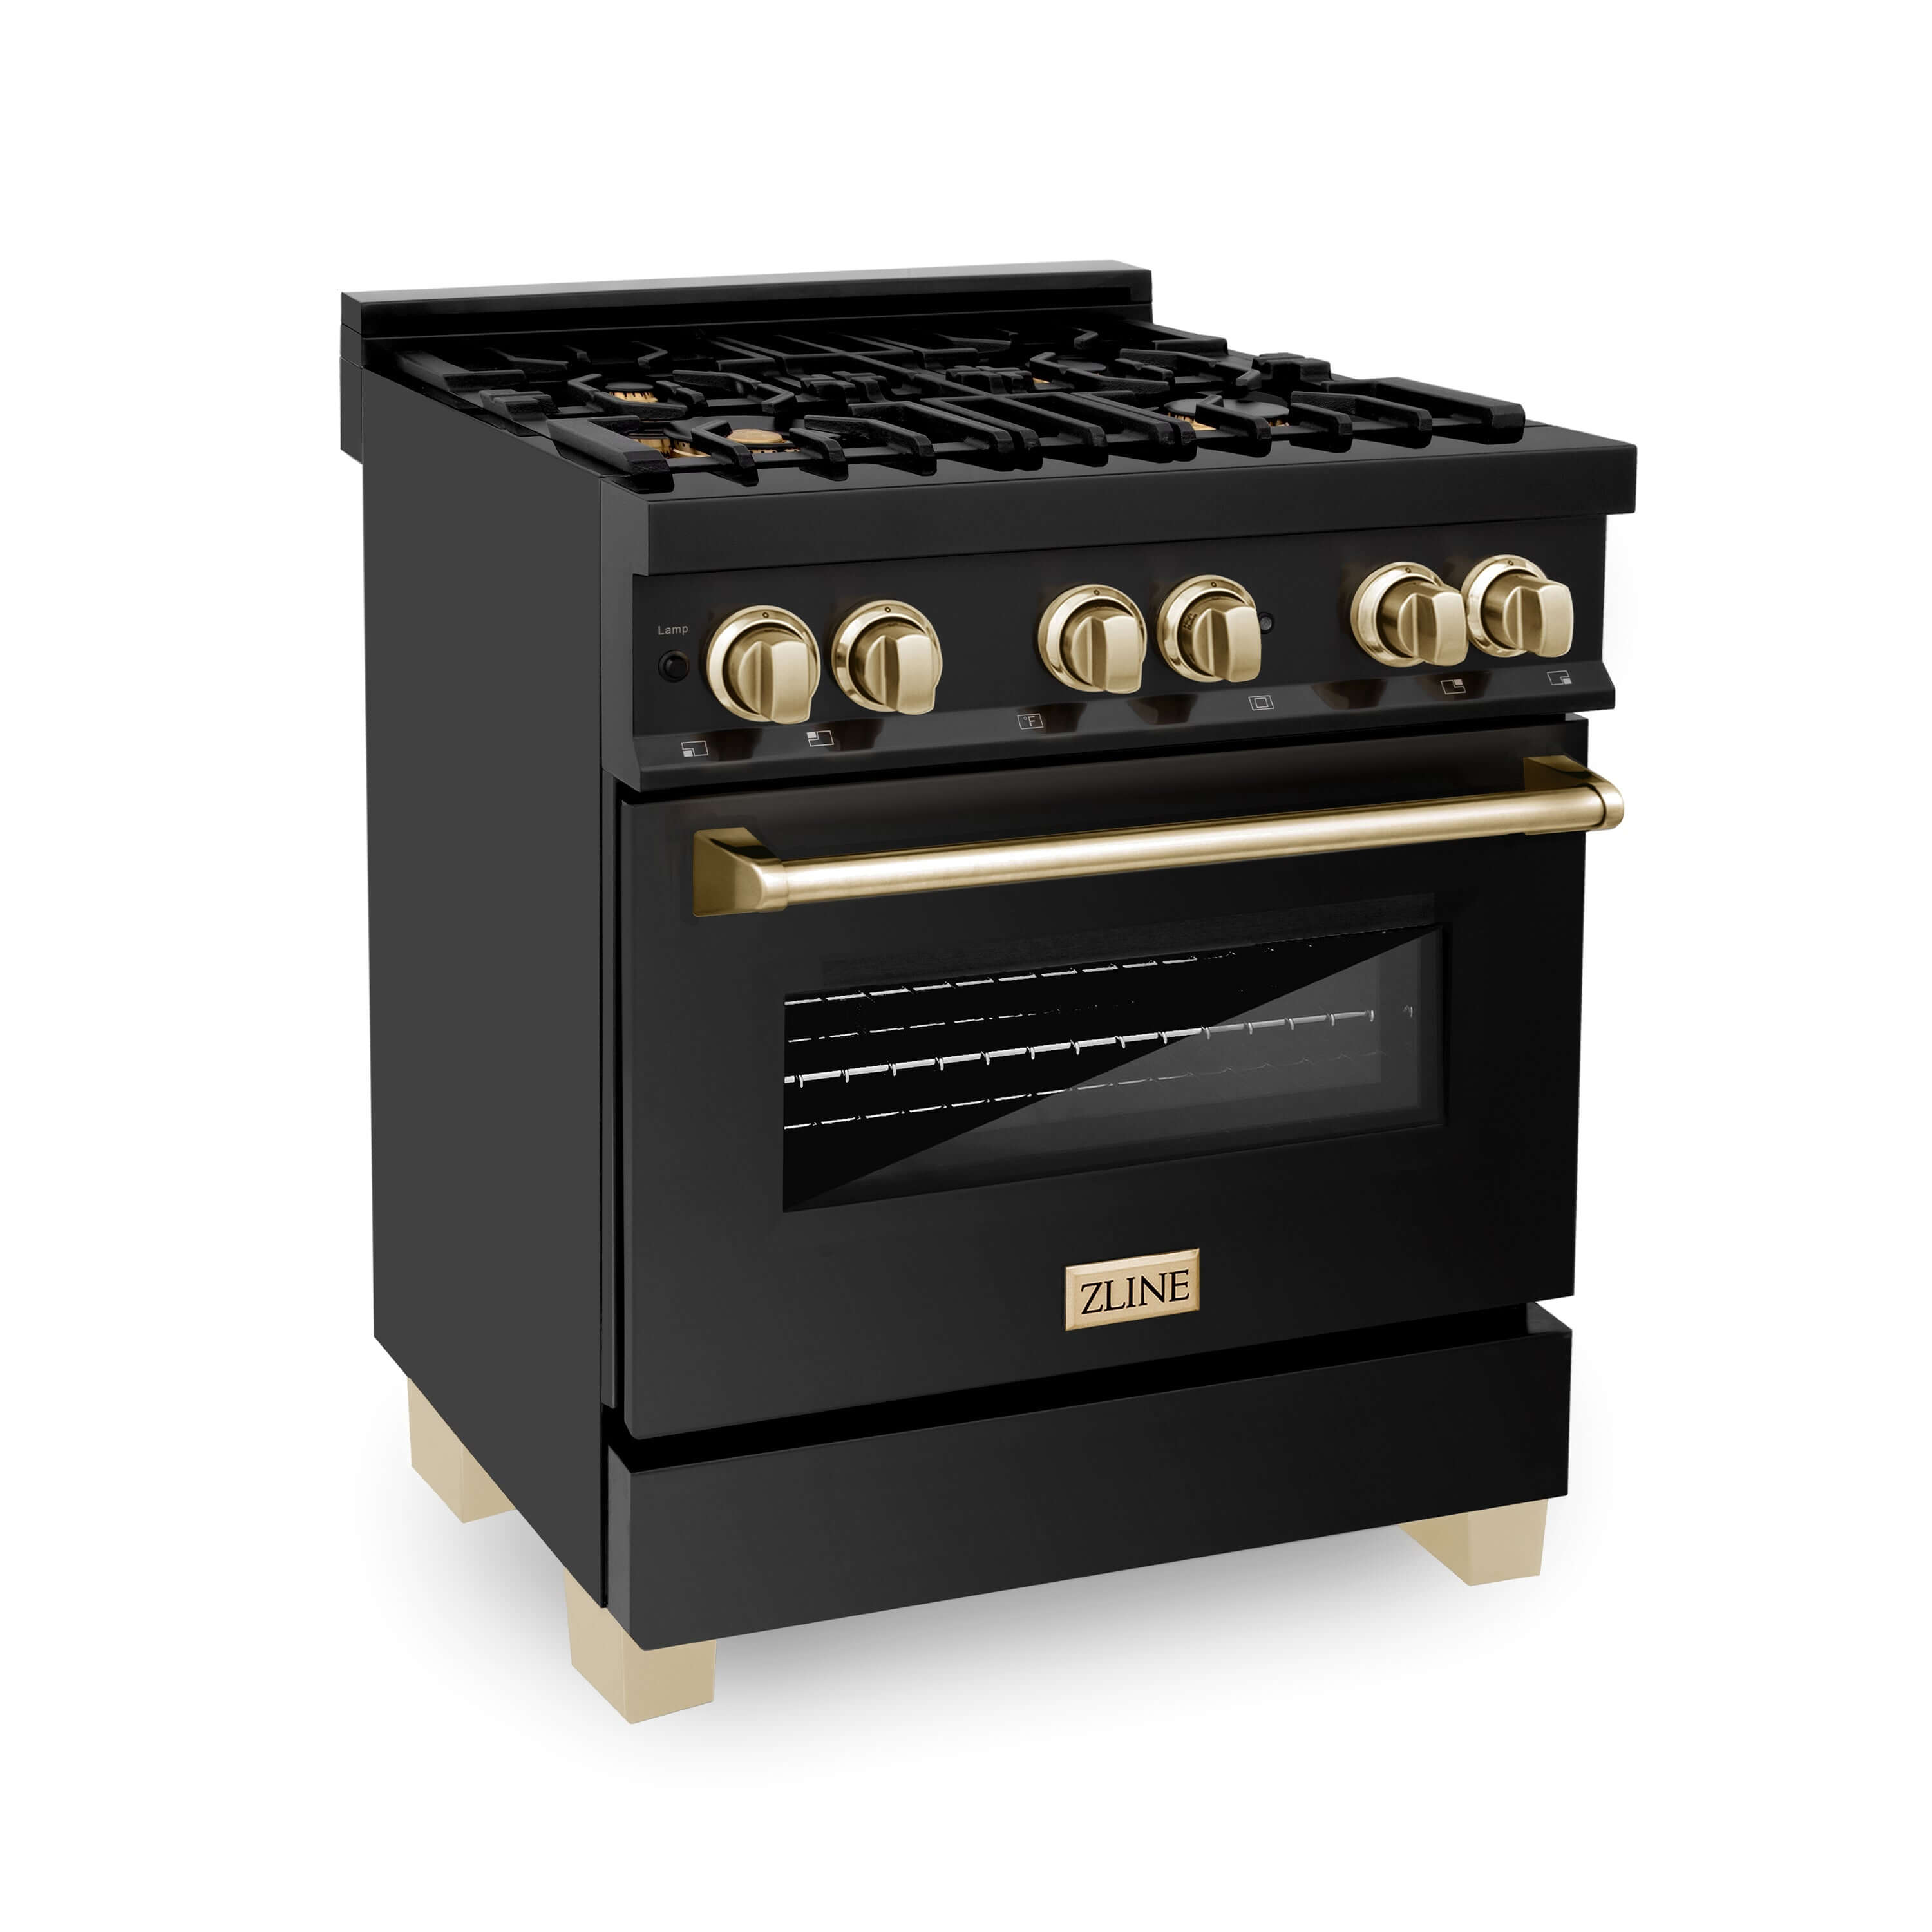 ZLINE Autograph Edition 30" Black Stainless Steel Dual Fuel Range with Polished Gold accents (RABZ-30-G)